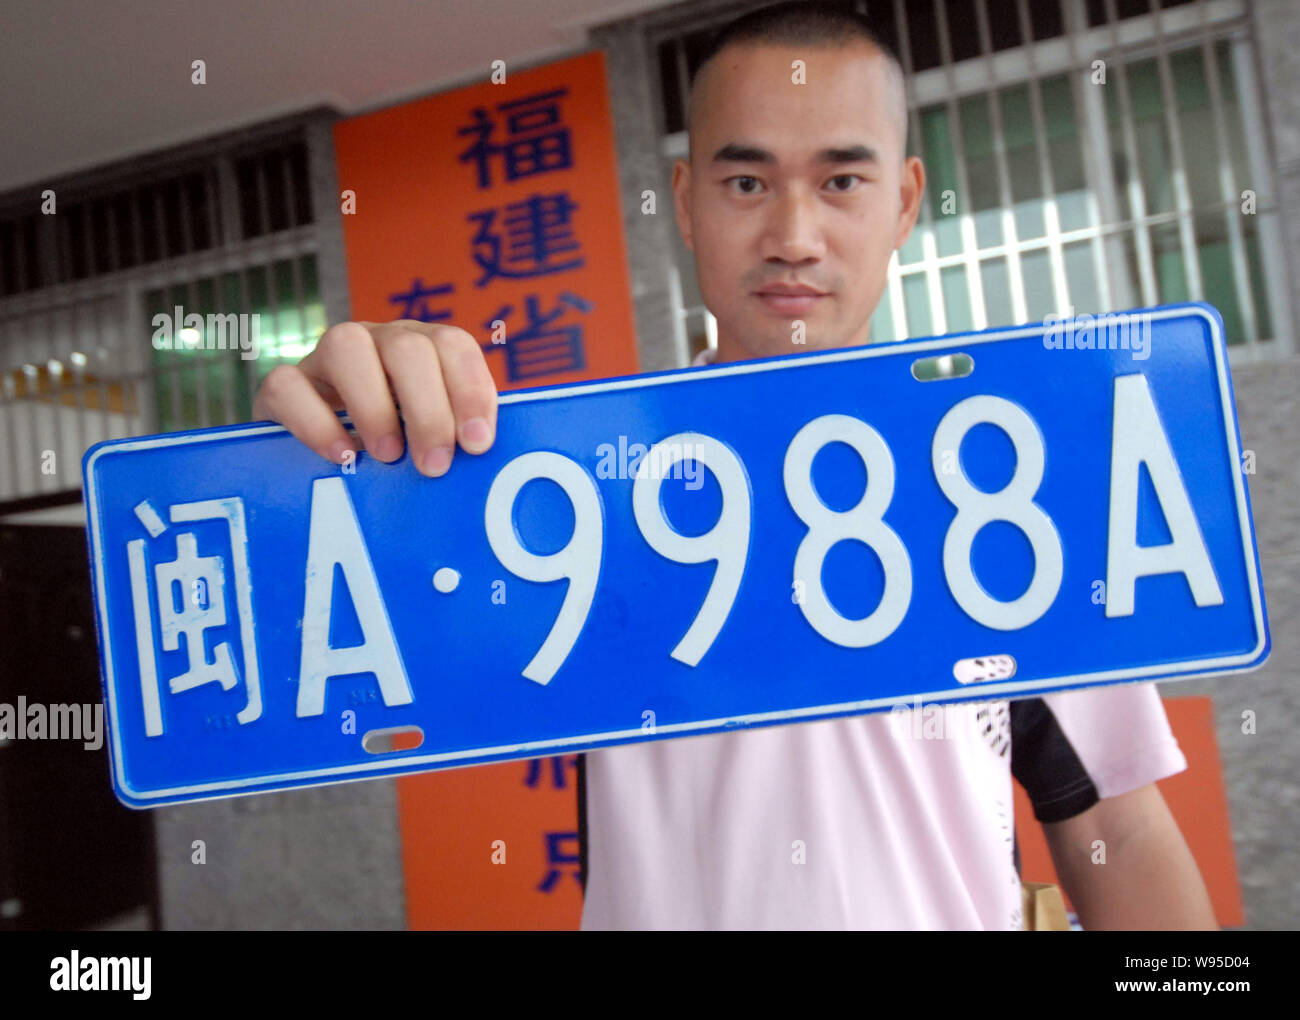 A Chinese car owner shows his car license plate with lucky numbers  Min-A9988A in Fuzhou city, southeast Chinas Fujian province, 6 October 2008  Stock Photo - Alamy